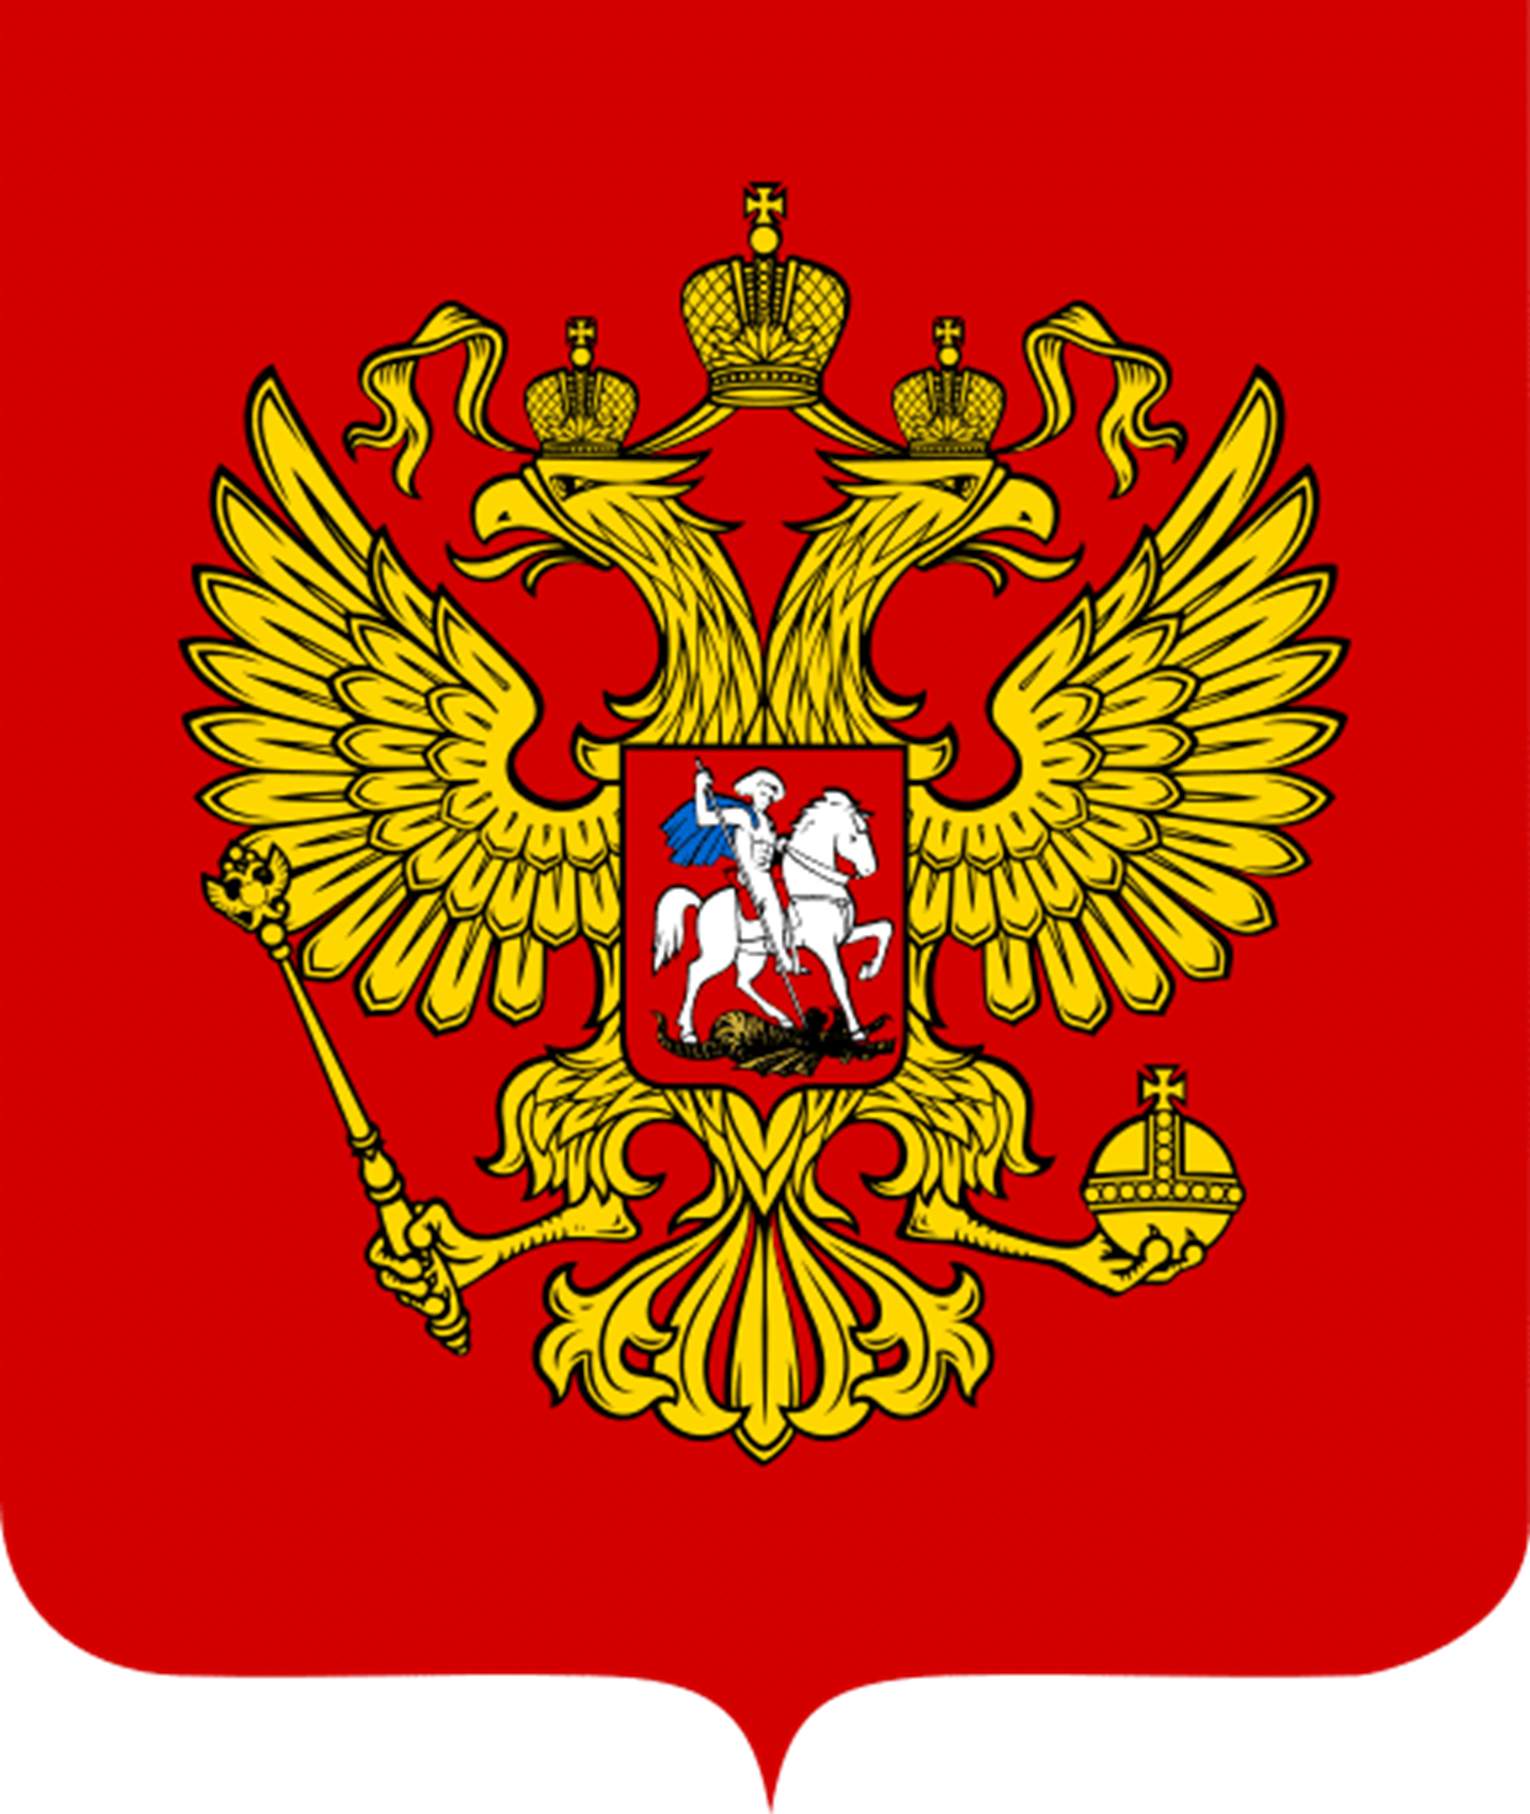 What is the population of Russia and what does the flag symbolise